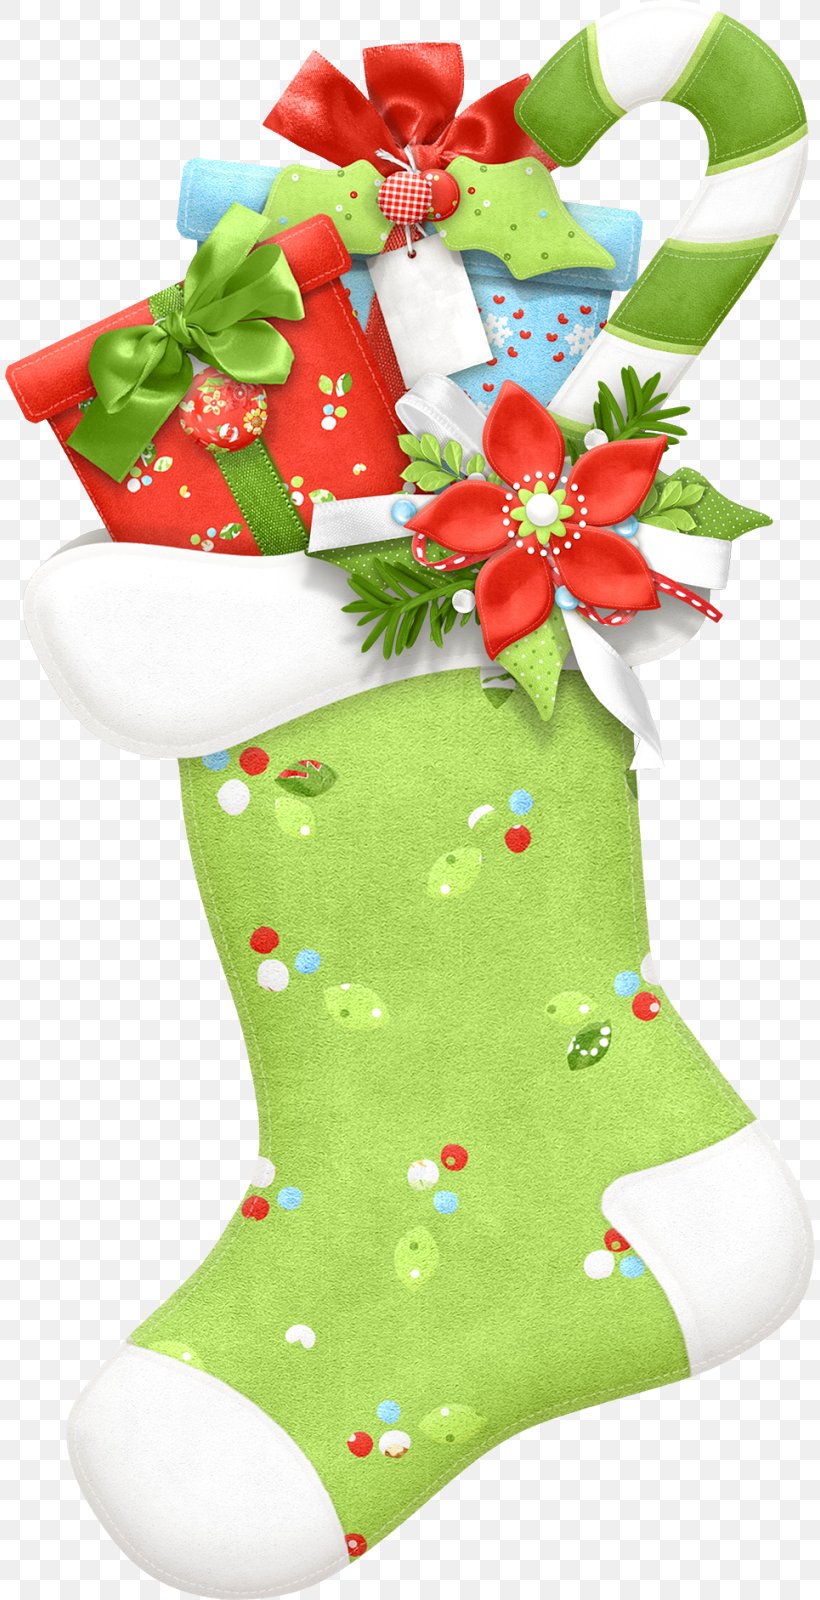 Christmas Stockings Clip Art, PNG, 810x1600px, Christmas Stockings, Candy Cane, Christmas, Christmas Card, Christmas Decoration Download Free